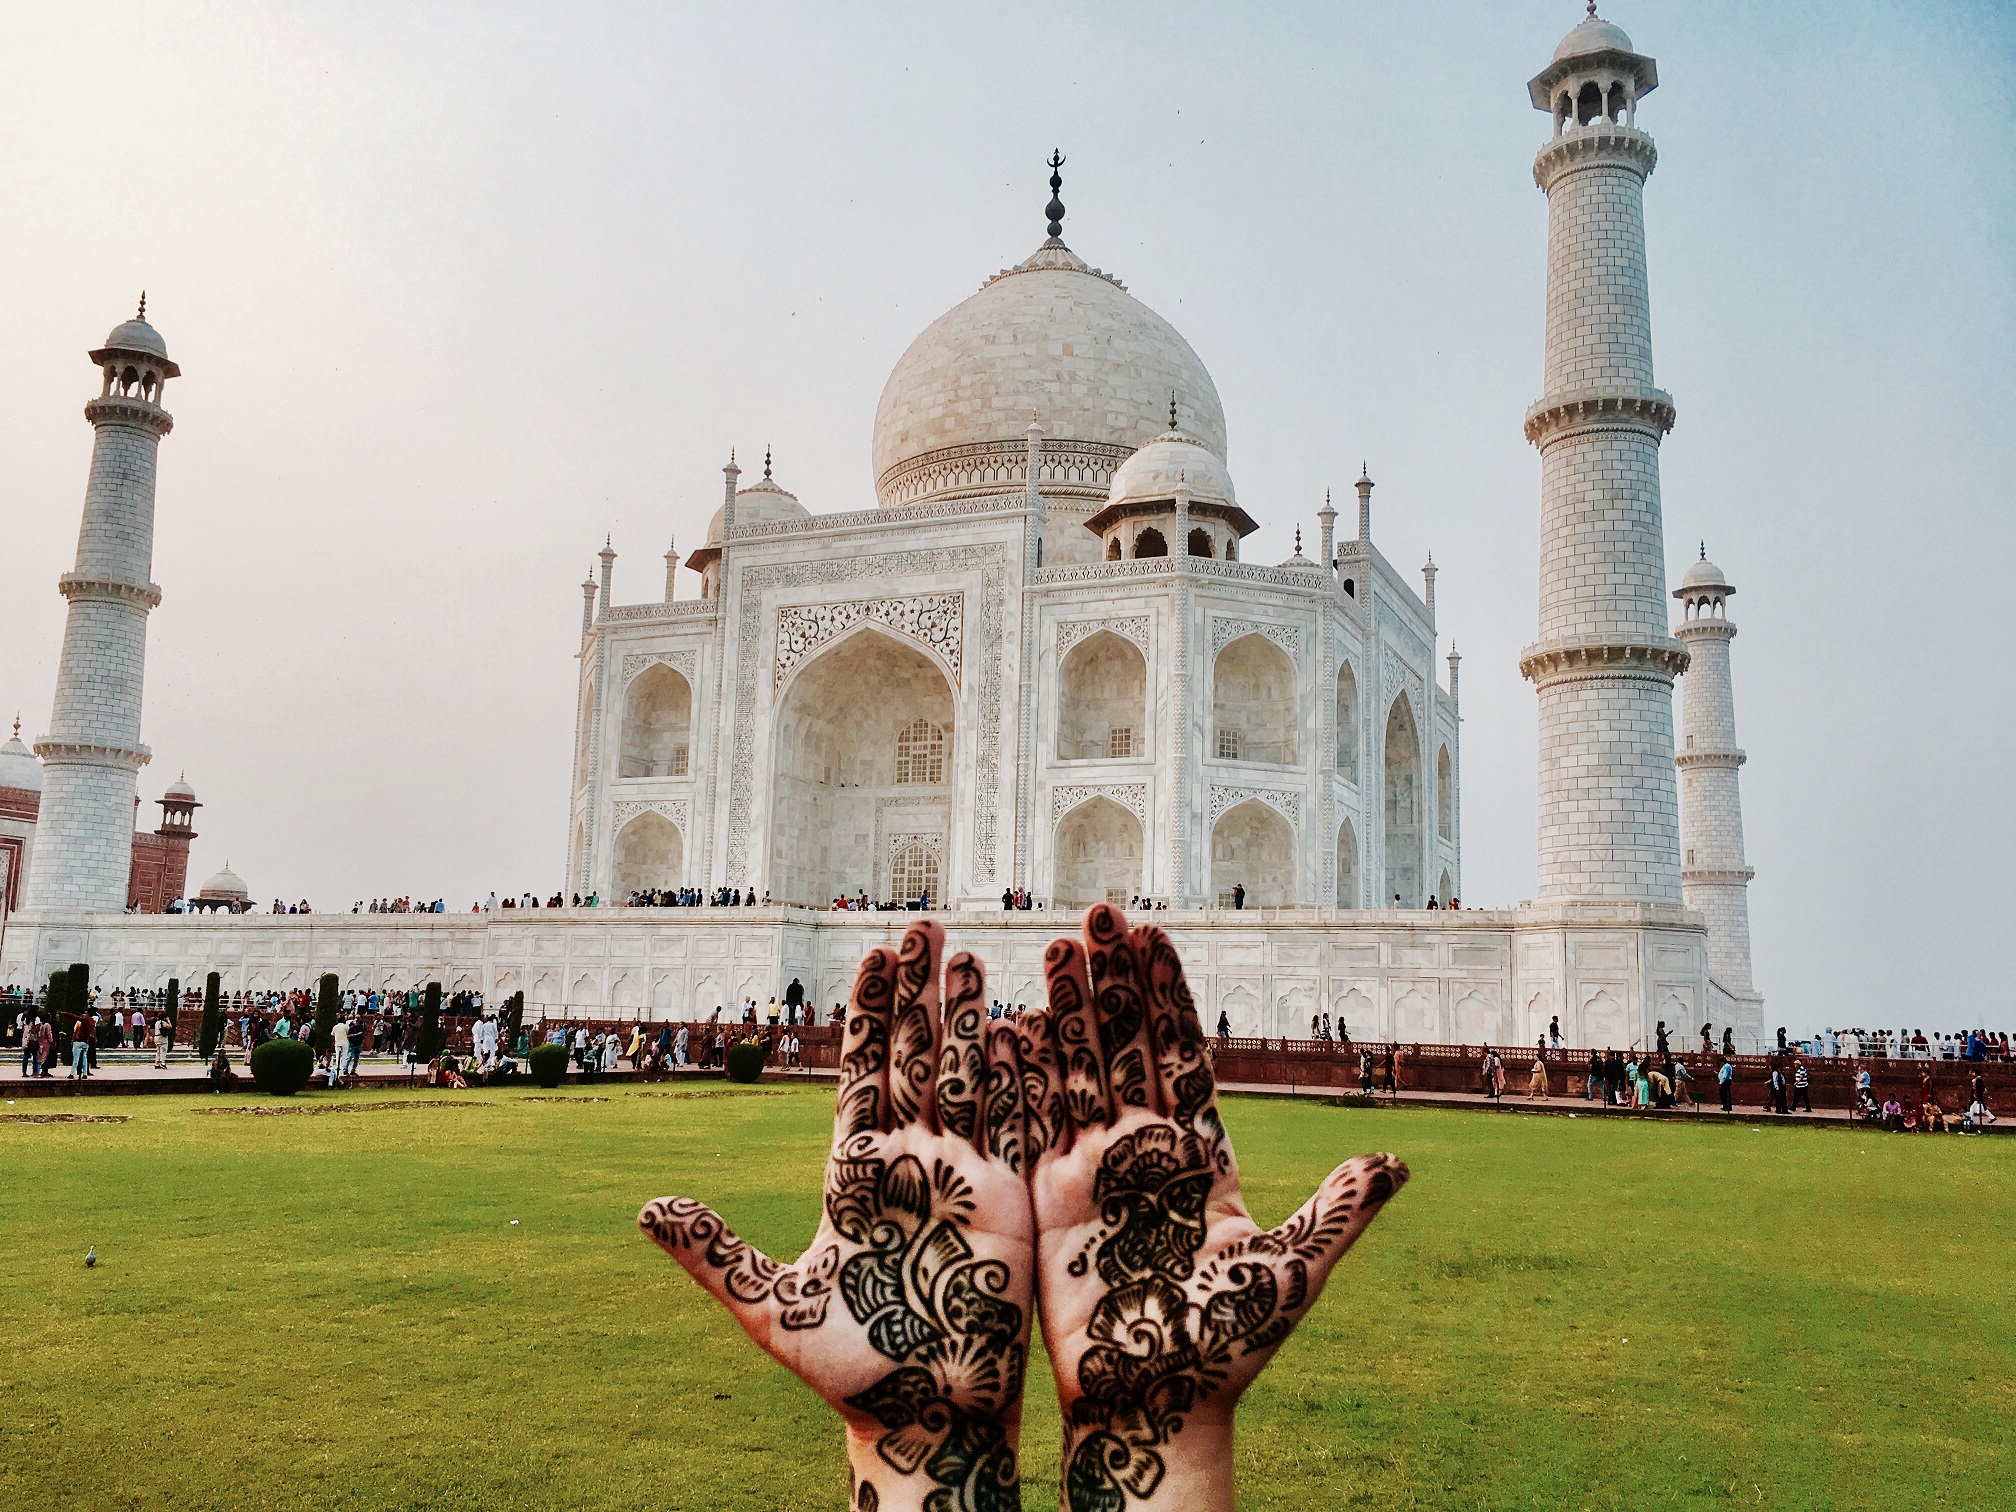 Seeing the monument of Taj Mahal made my eyes in tears . It is one of the most beautiful creation on earth. The Taj Mahal was built by the Mughal Emperor Shan Jahan in commemoration of his favourite wife, Empress Mumtaz Mahal. 